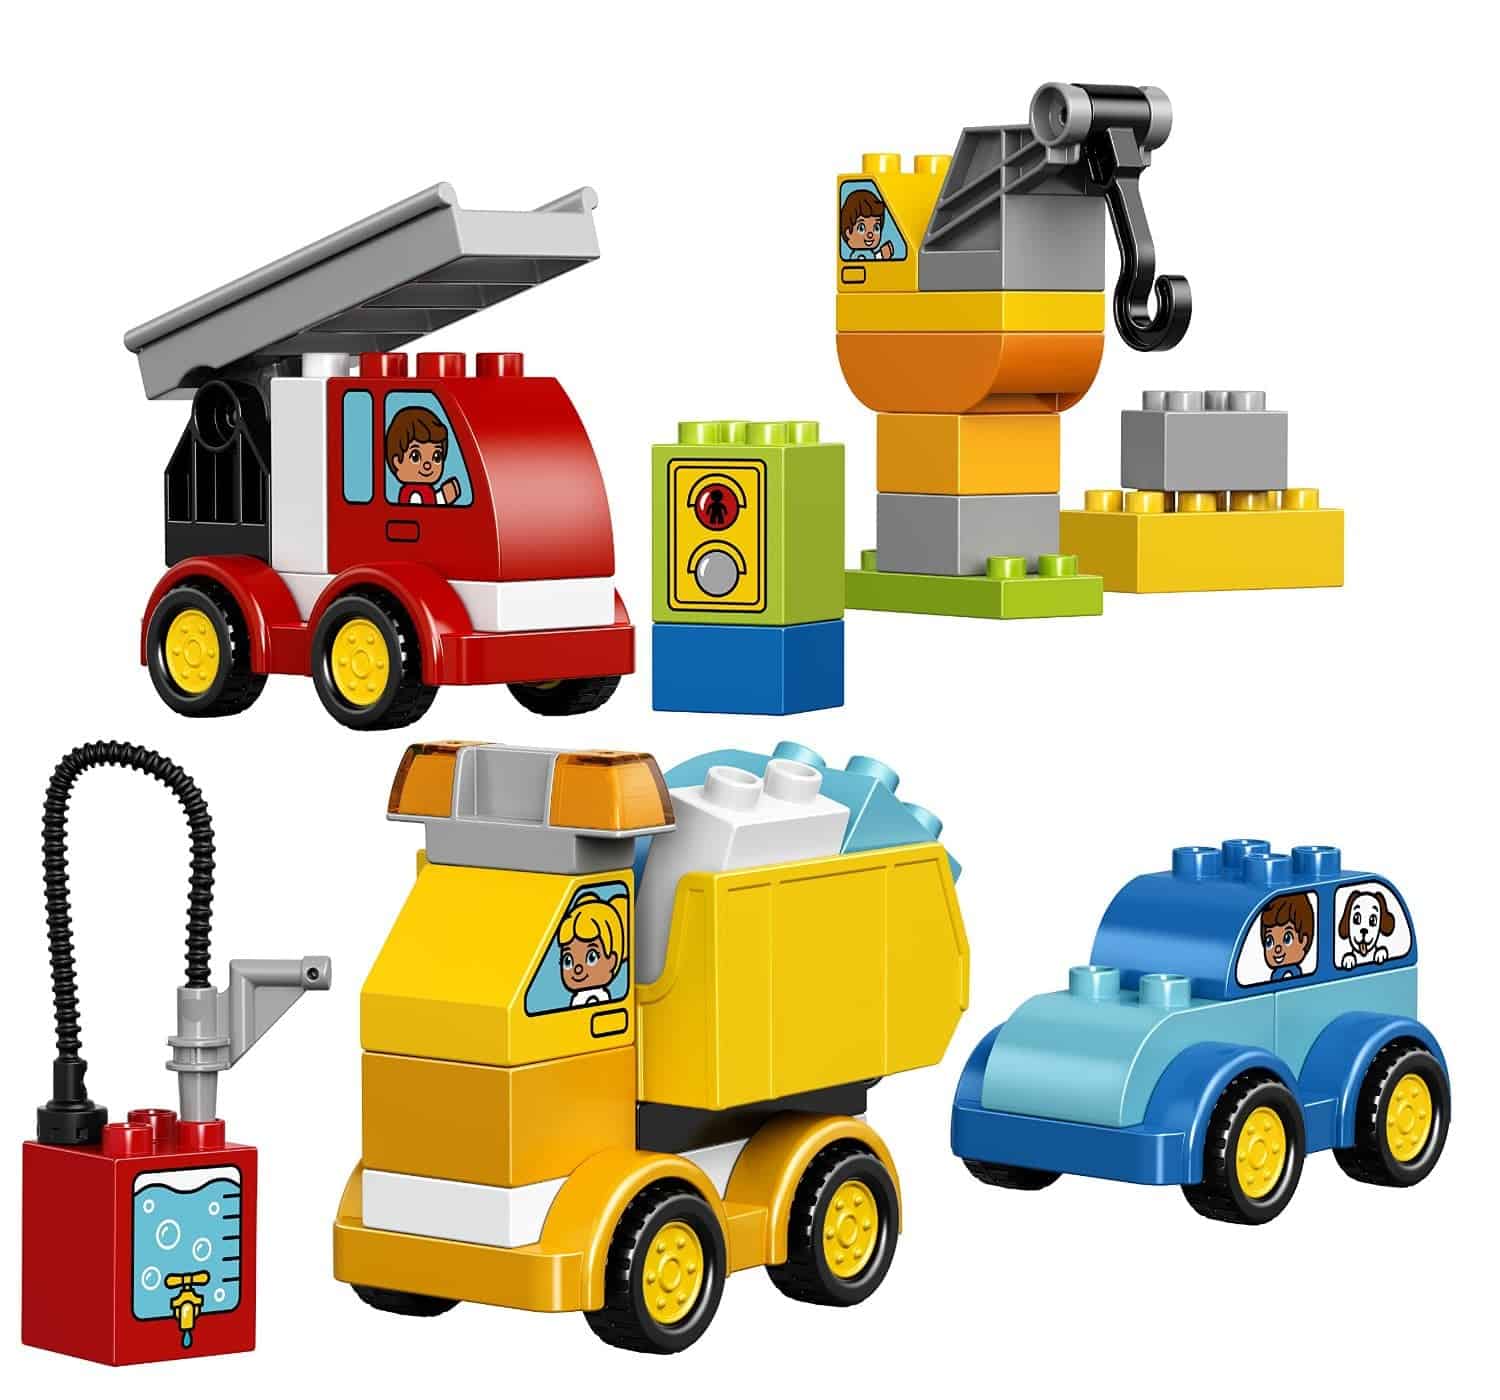 Lego Gift Ideas by Age - Toddler to Twelve Years: My First Cars and Trucks | www.thepinningmama.com